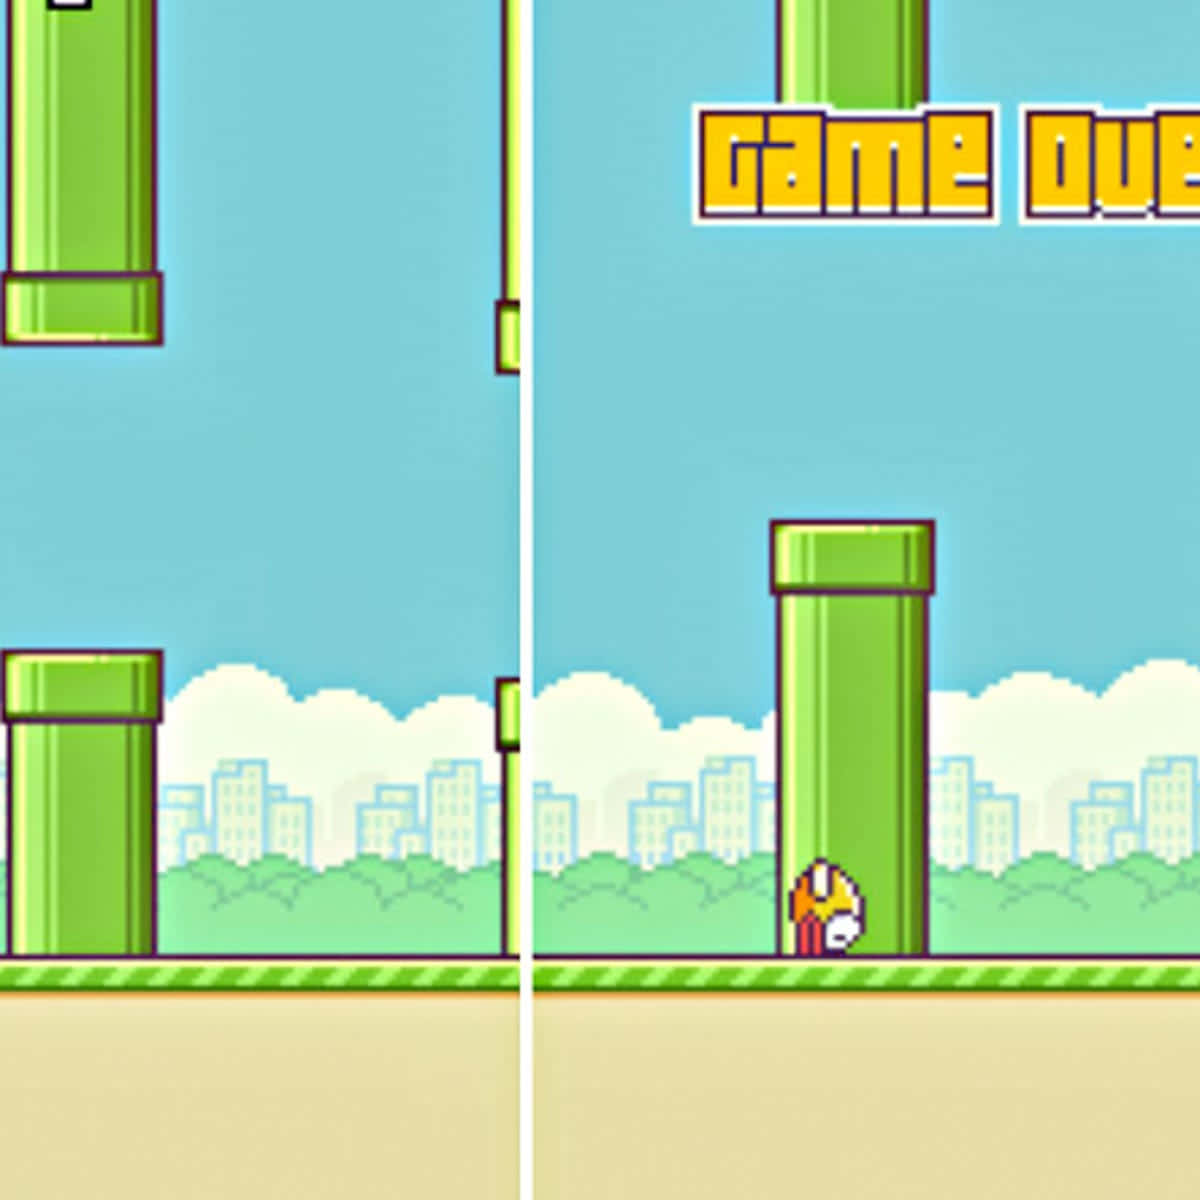 A Game Of Flappy Bird With Two Different Images